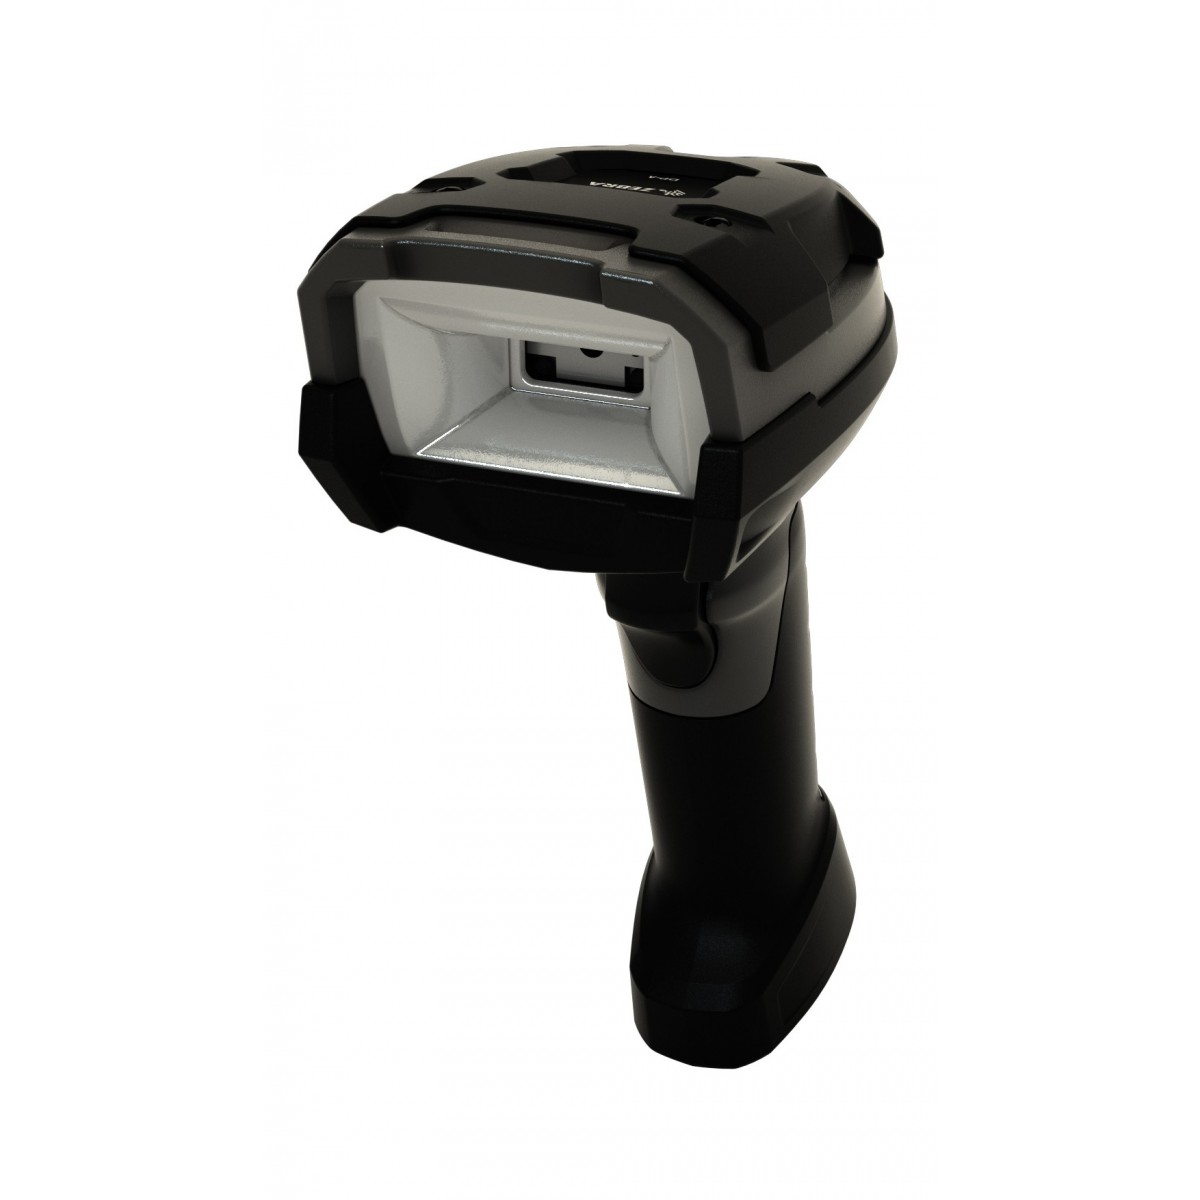 DS3608 RUGGED AREA IMAGER-DIRECT MARK CORD GRAY VIBRATION